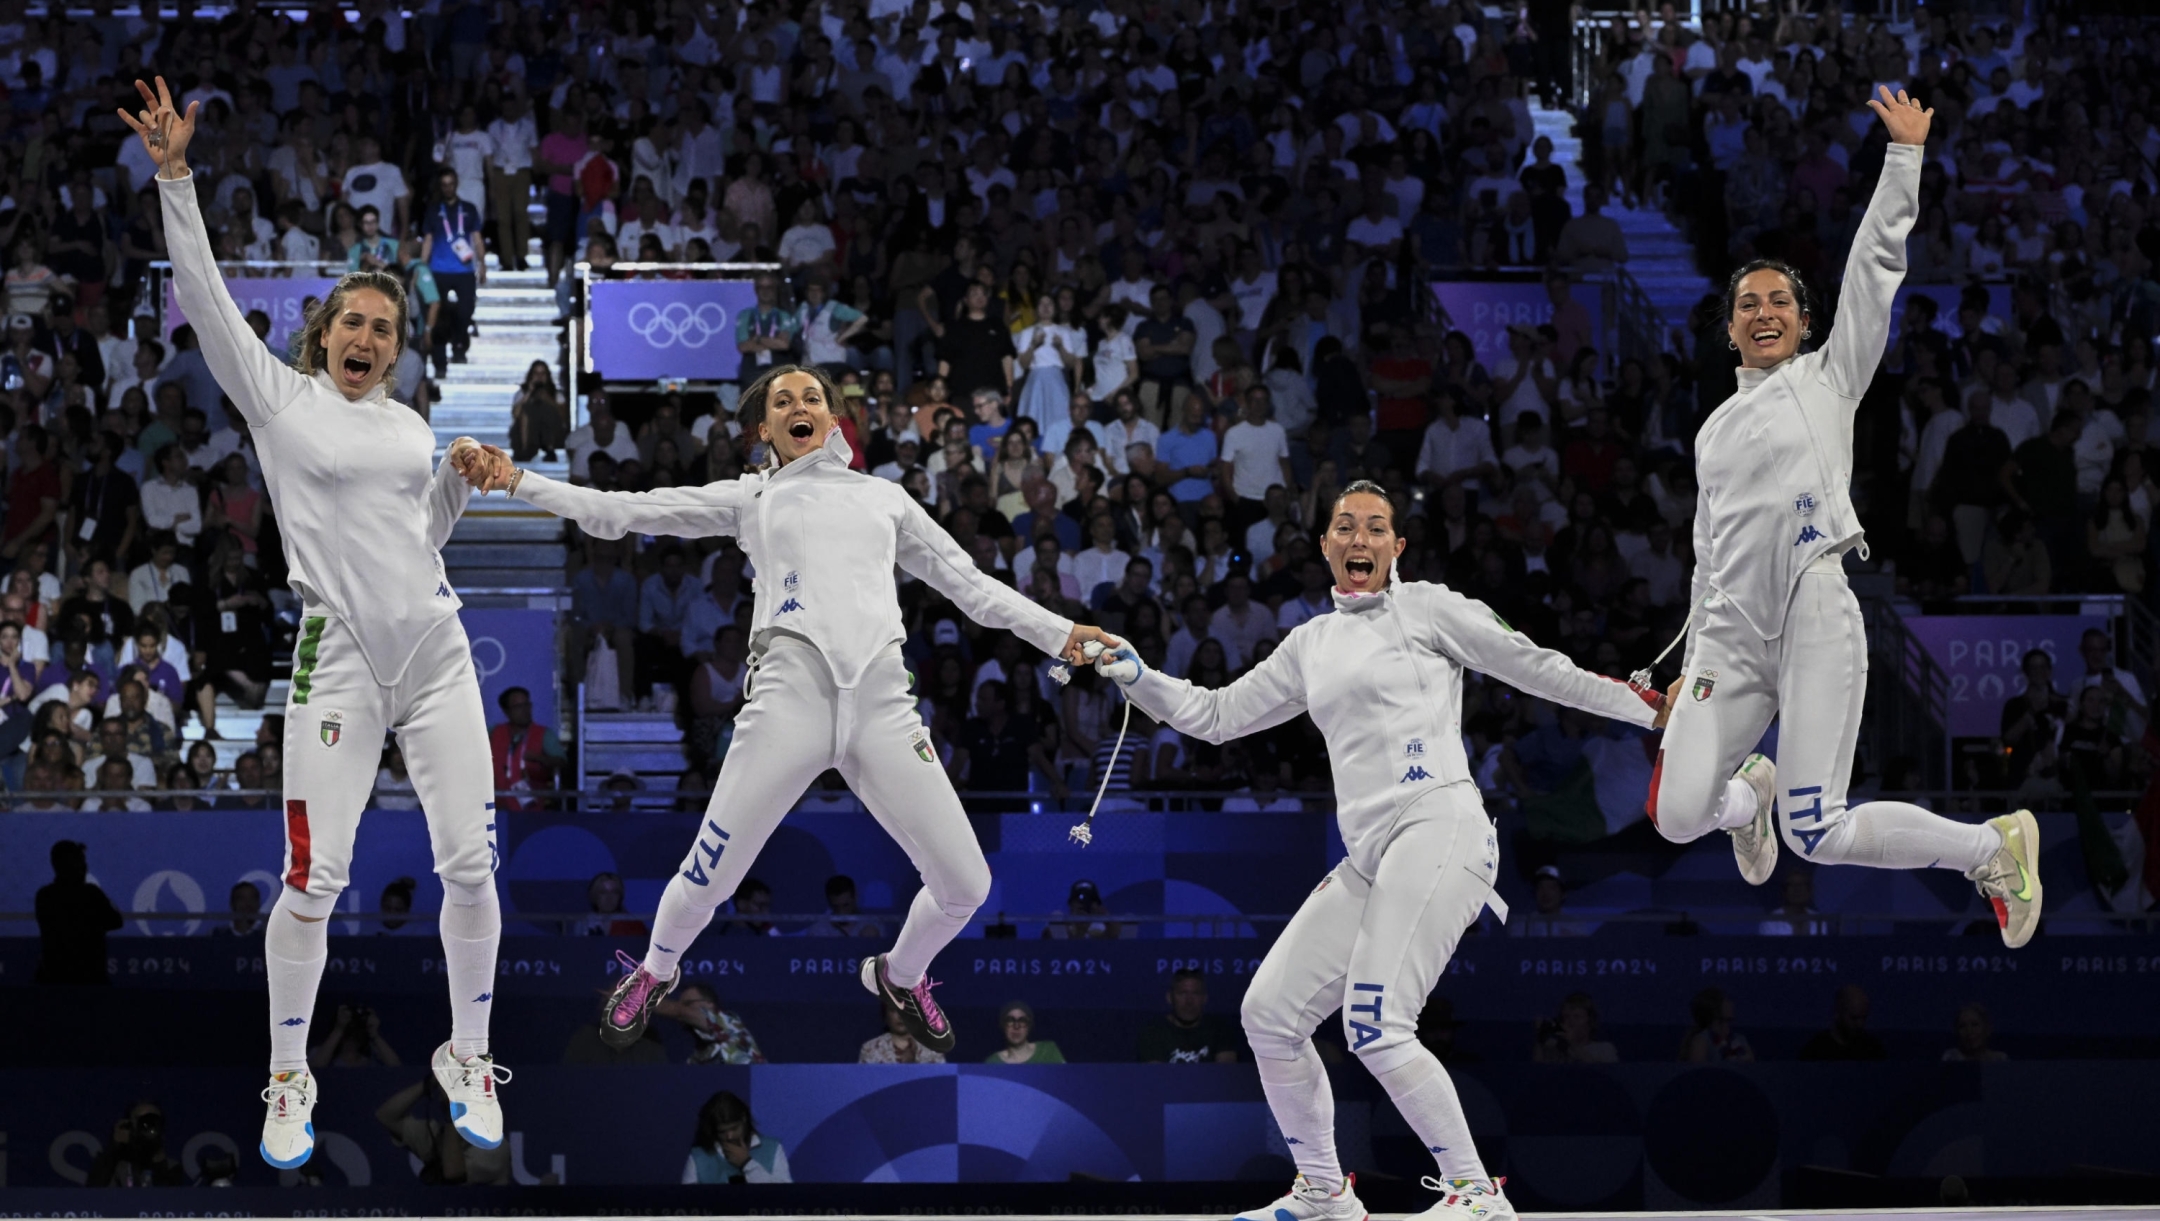 (L-R) Gulia Rizzi, Rossella Fiamingo, Alberta Santuccio and Mara Navarria     gold medalist Italy epee team celebrates during award ceremony for the Women Epee Team Gold medal match bout of the Fencing competitions in the Paris 2024 Olympic Games, at the Grand Palais in Paris, France, 30 July 2024. ANSA / CIRO FUSCO